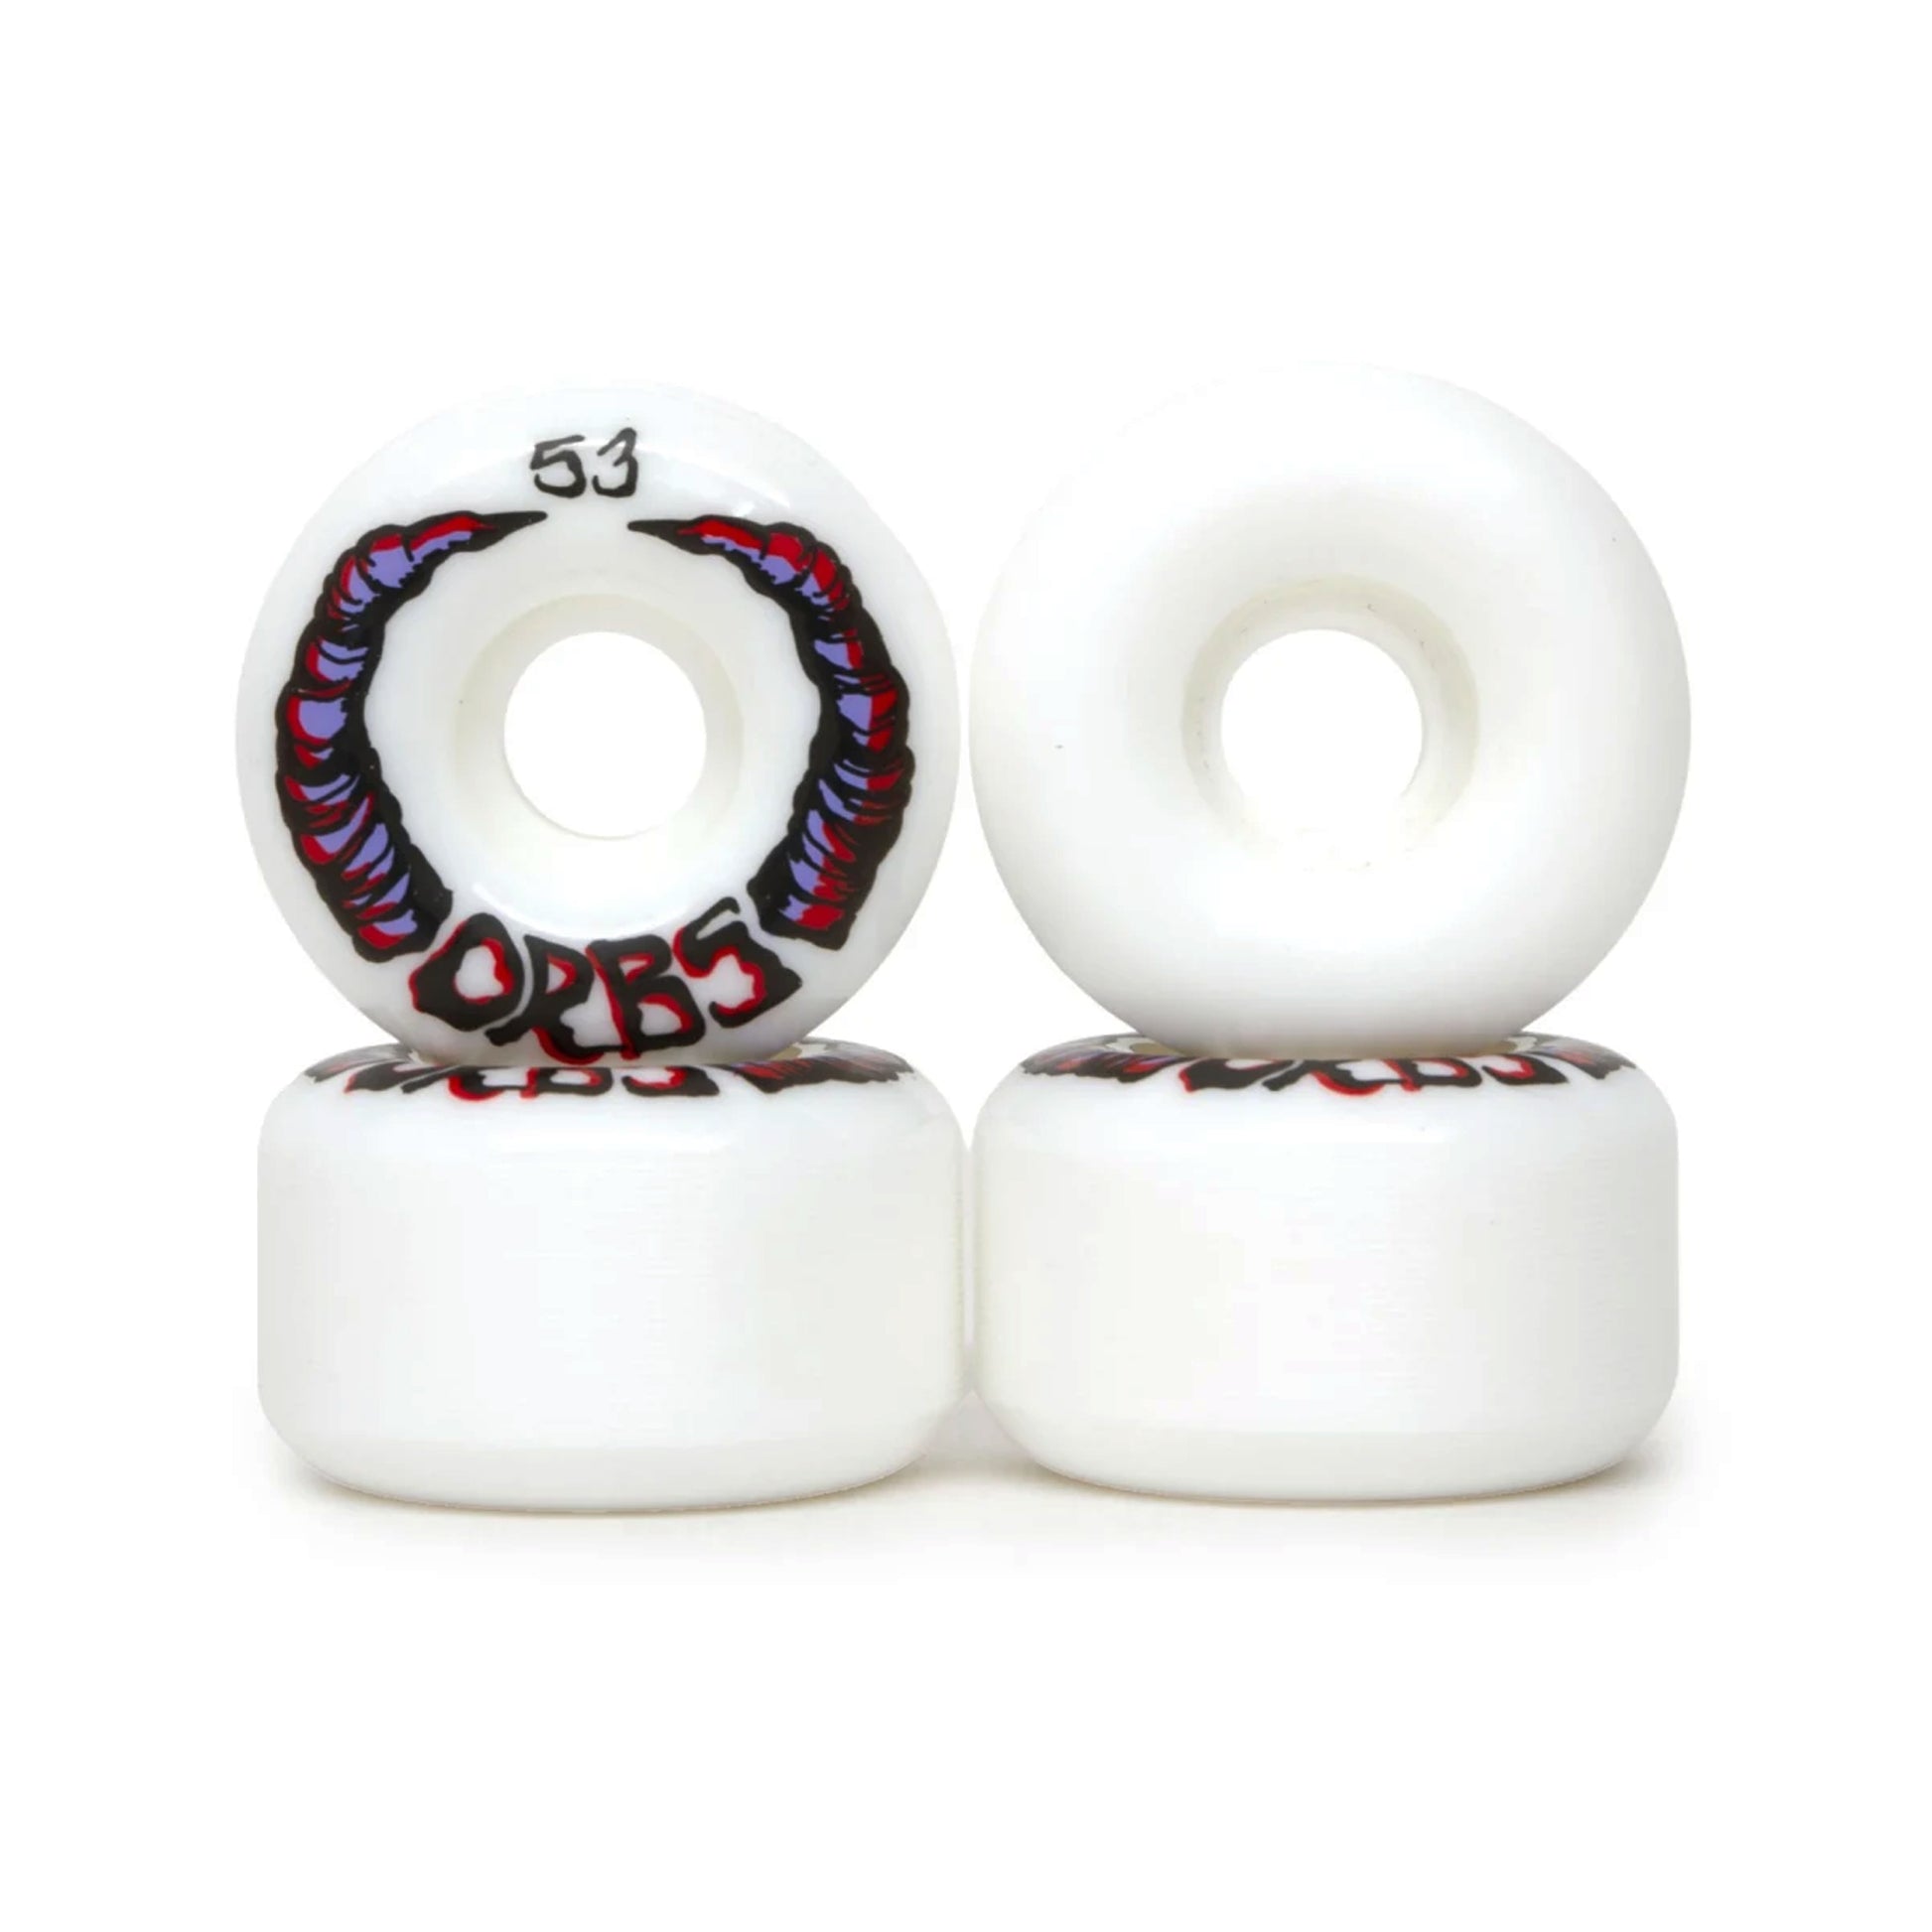 Orbs - 53mm - Apparitions - White - Prime Delux Store